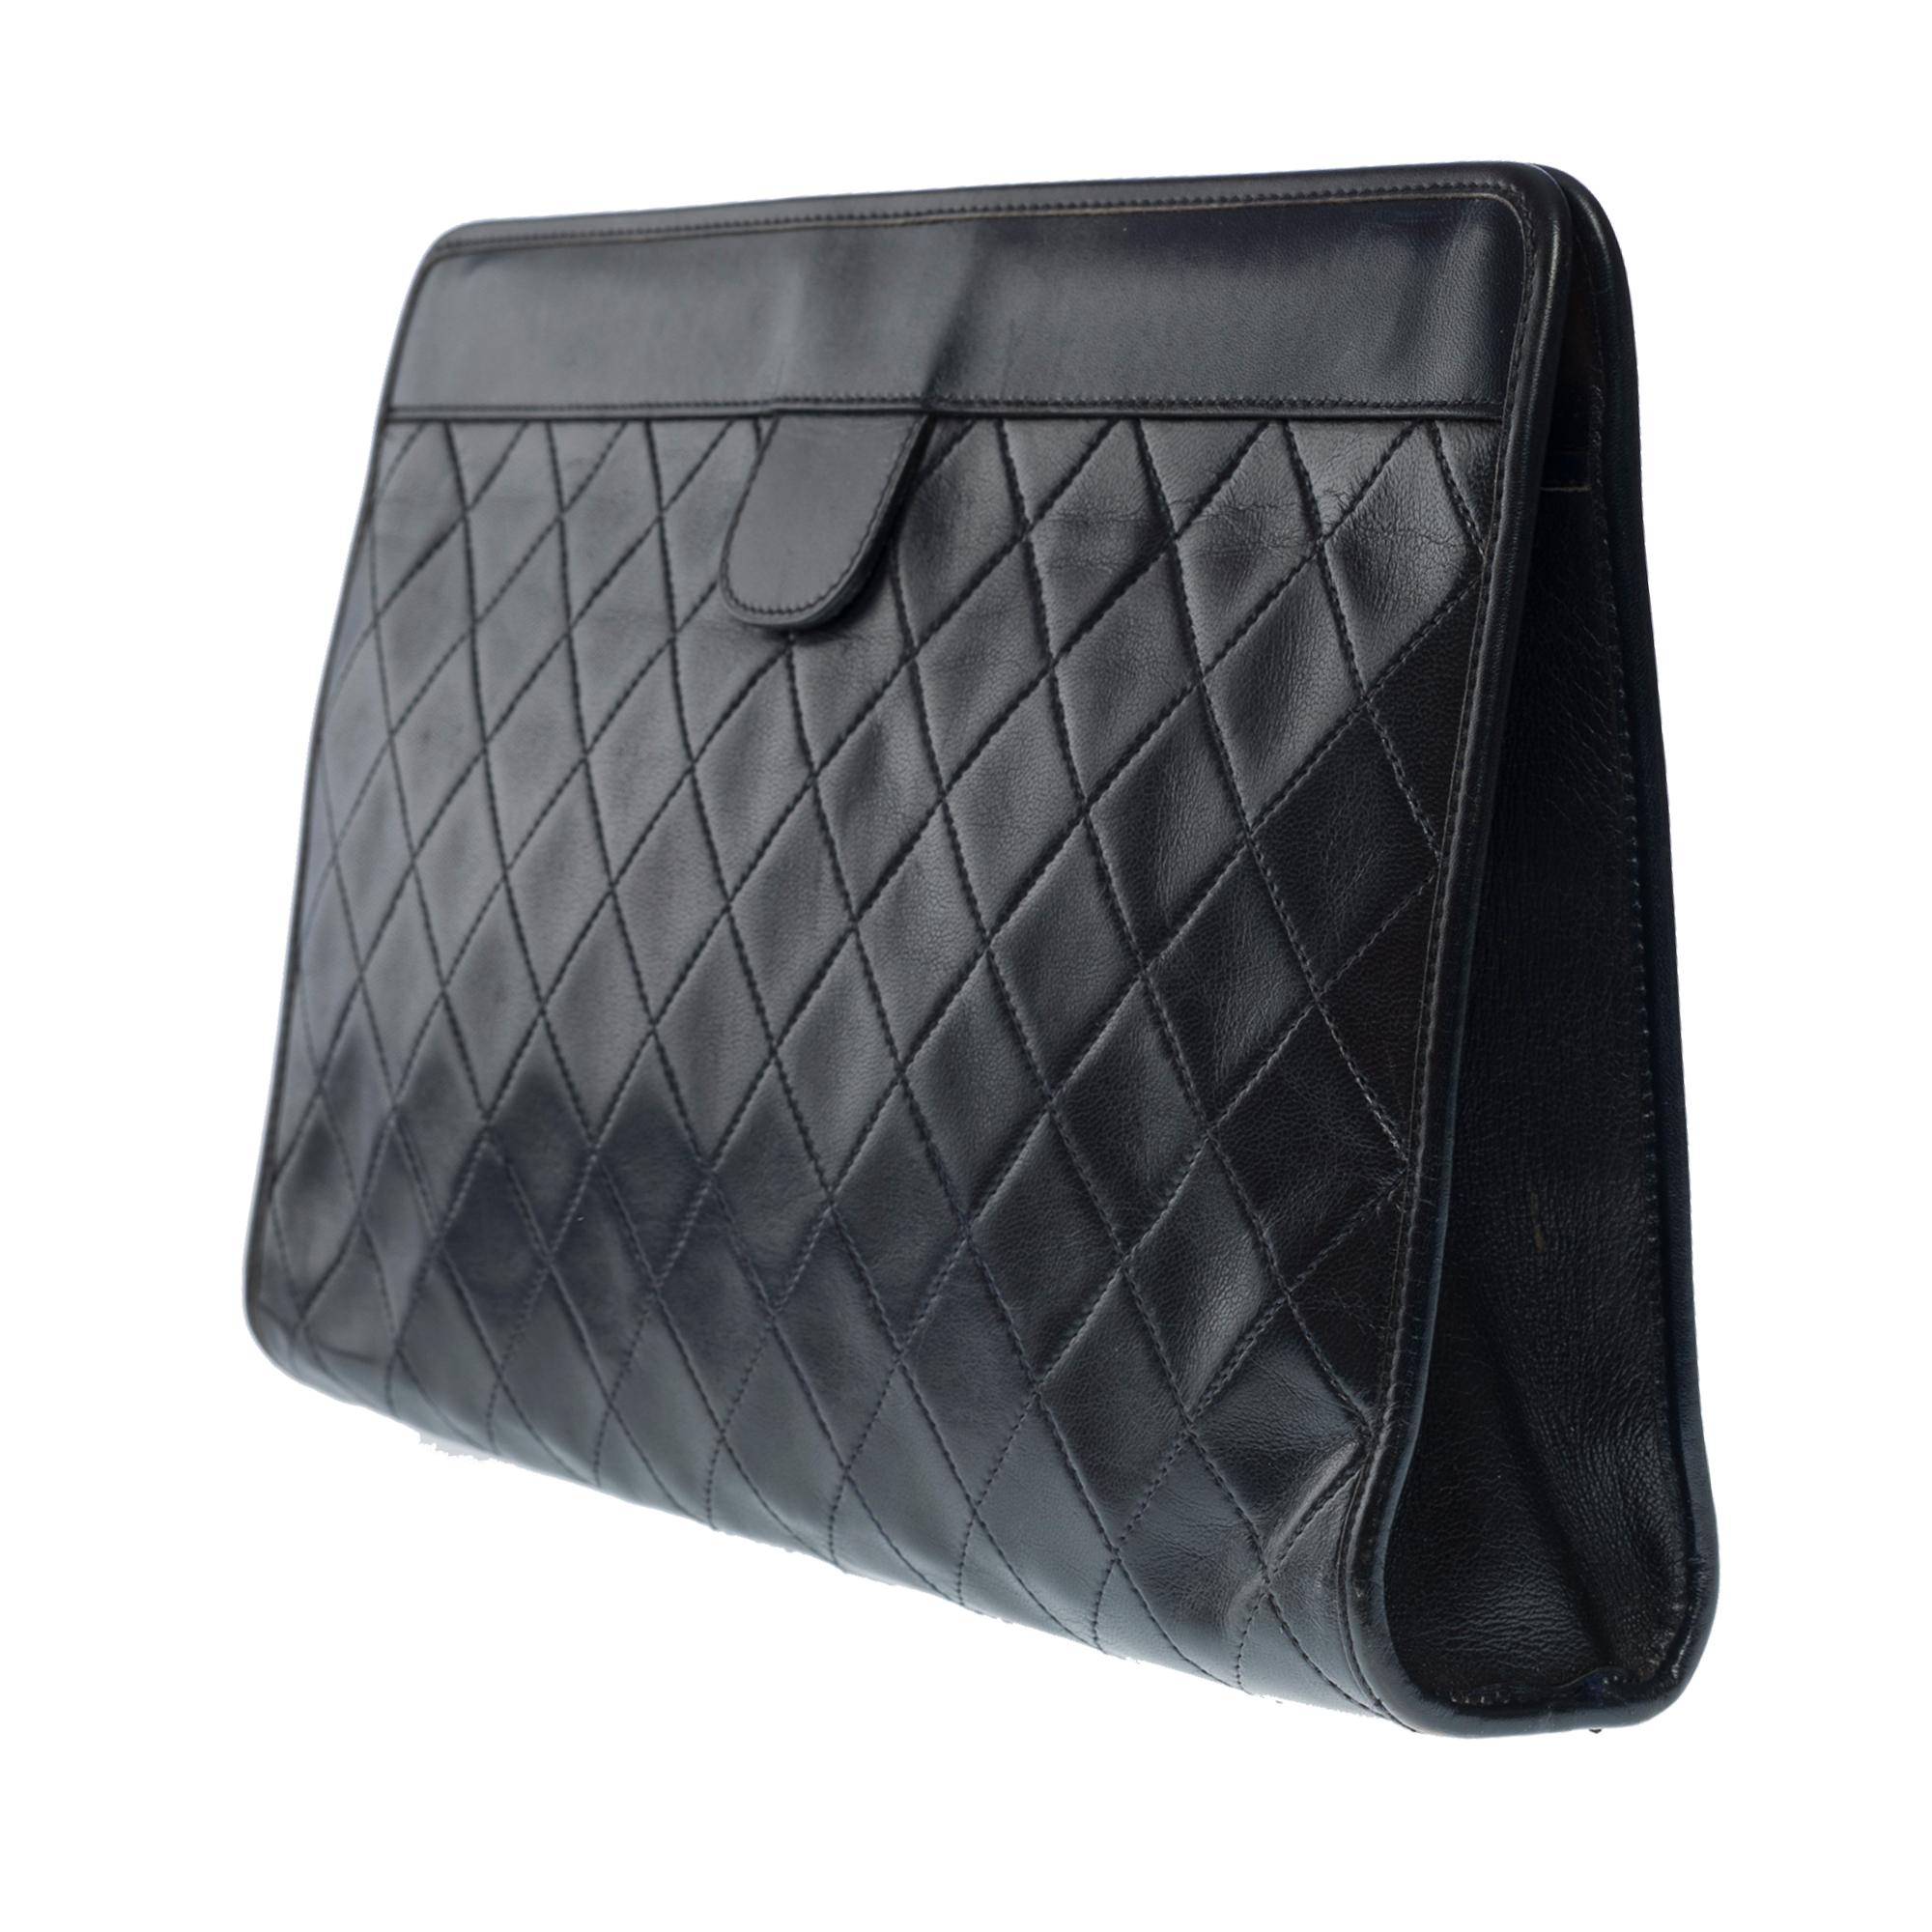 Women's Amazing Chanel Classic Clutch in black quilted lambskin leather, GHW